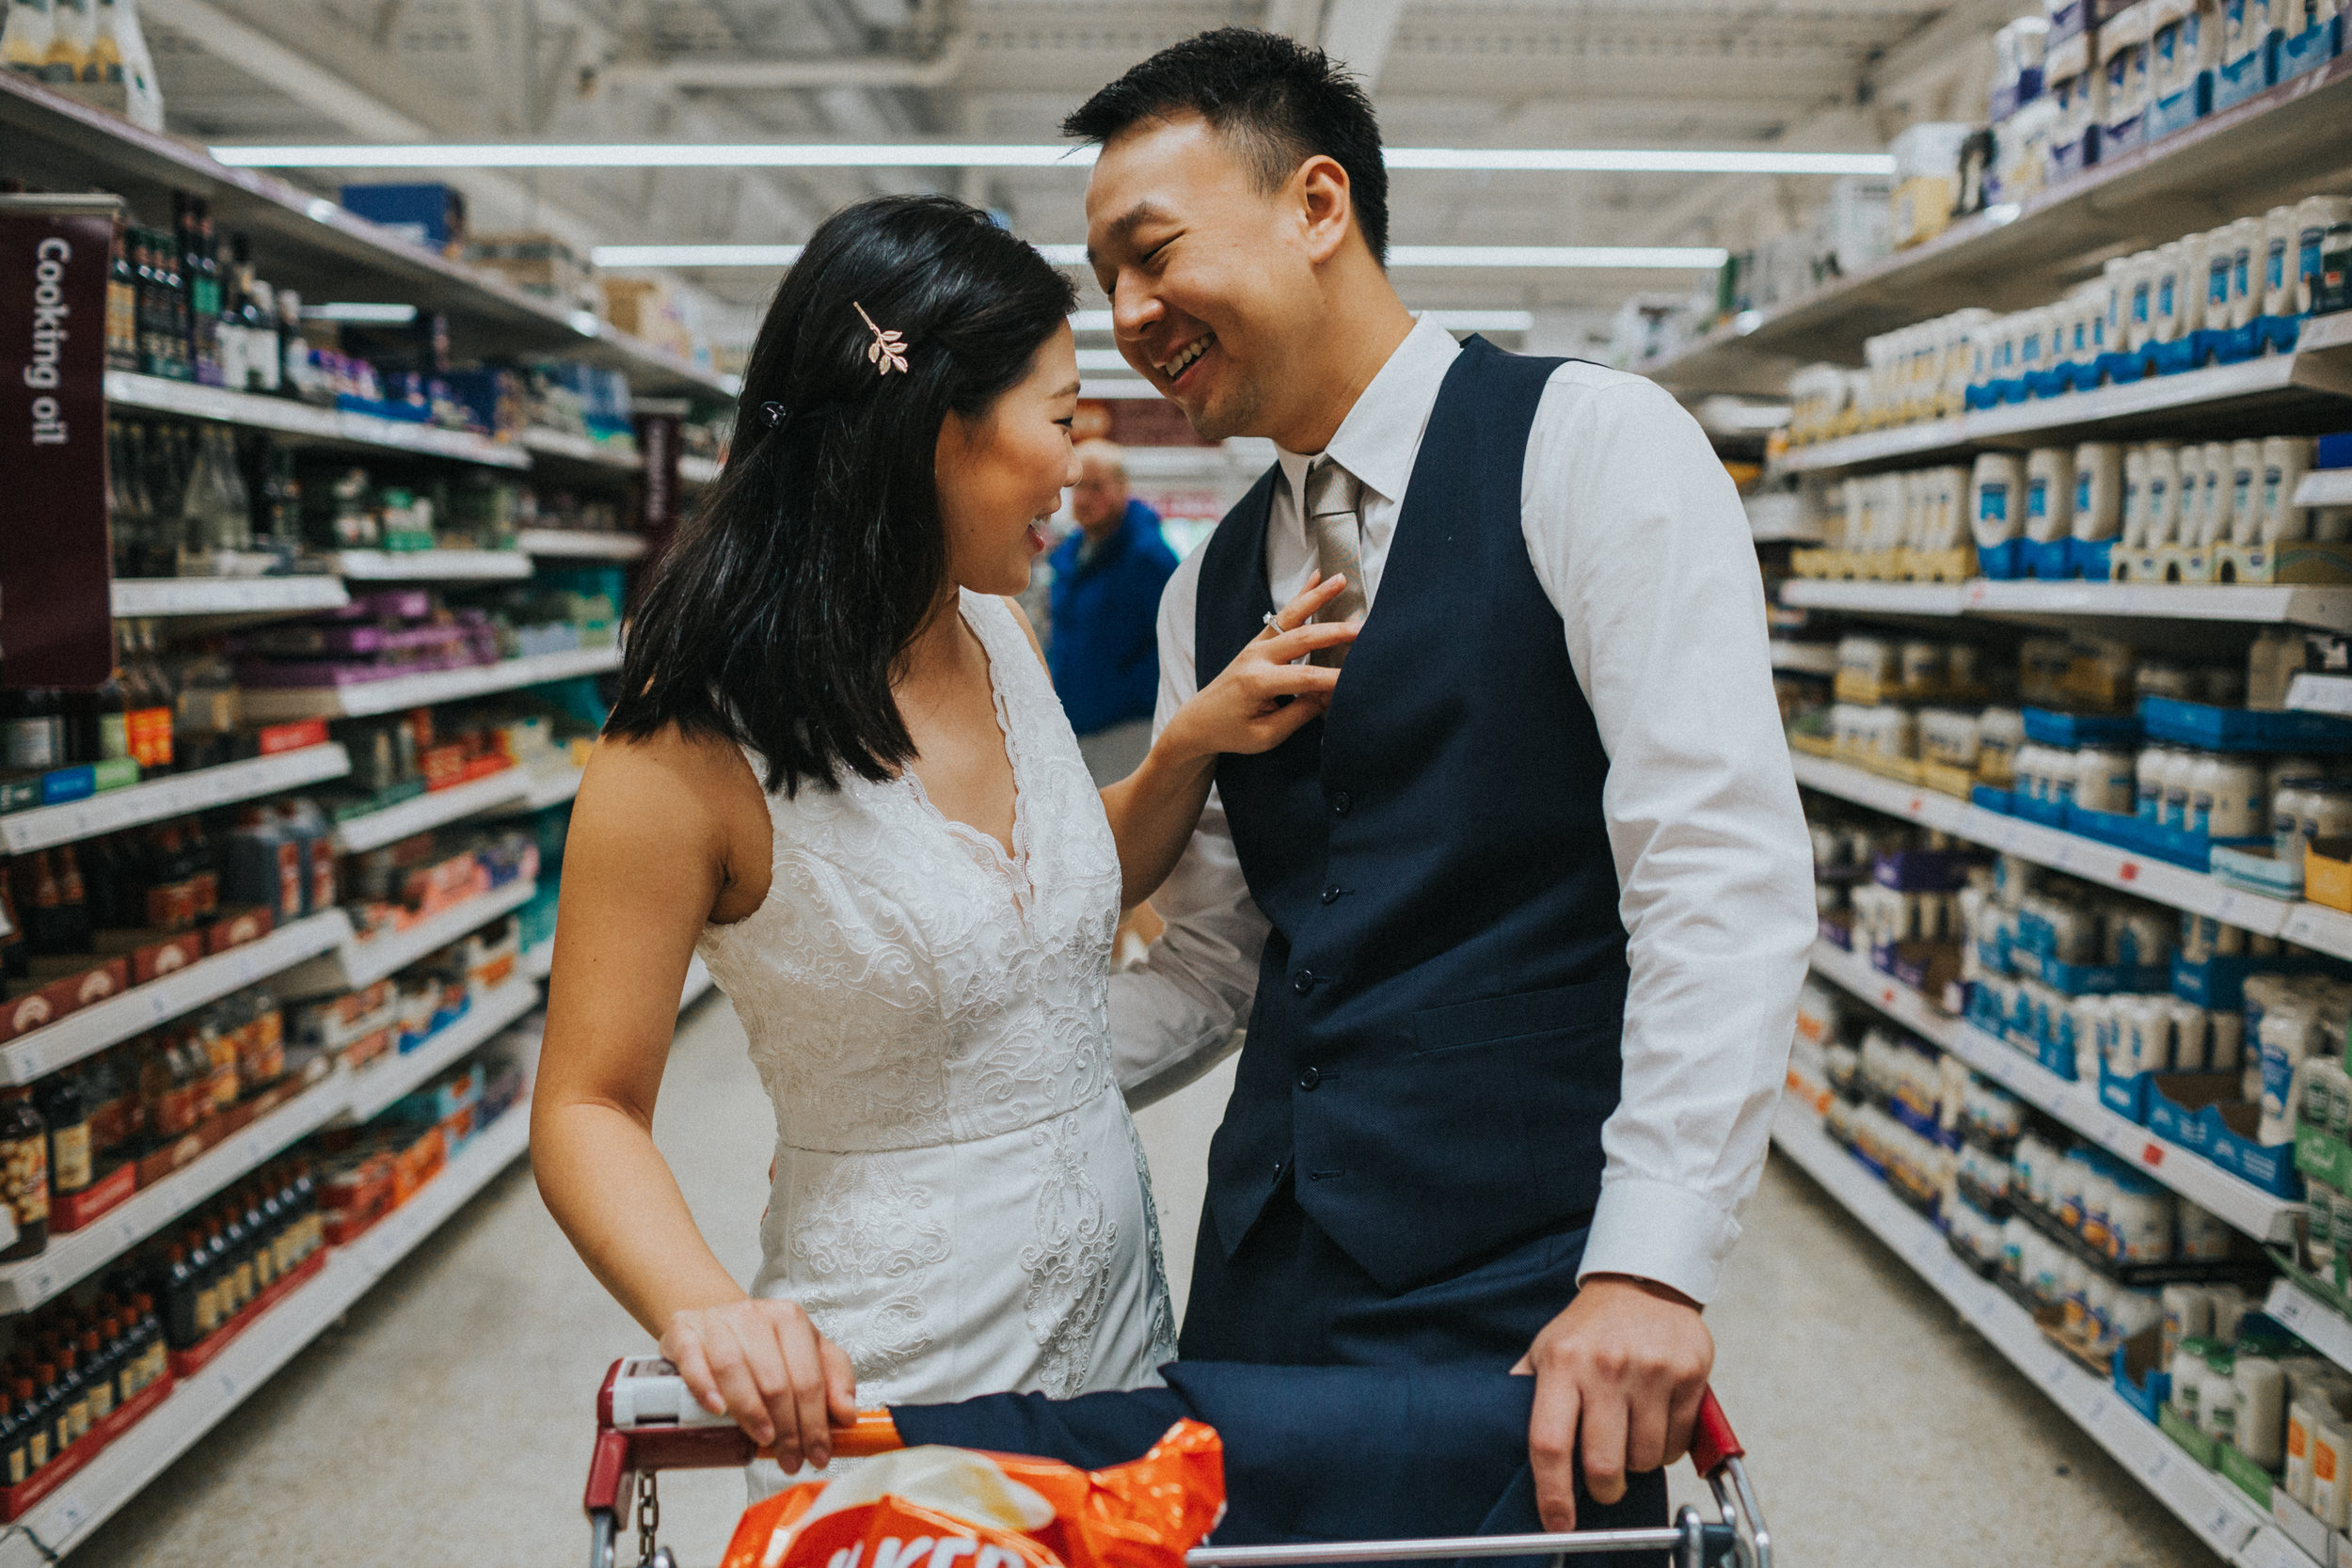 Couple have a moment together in supermarket. 